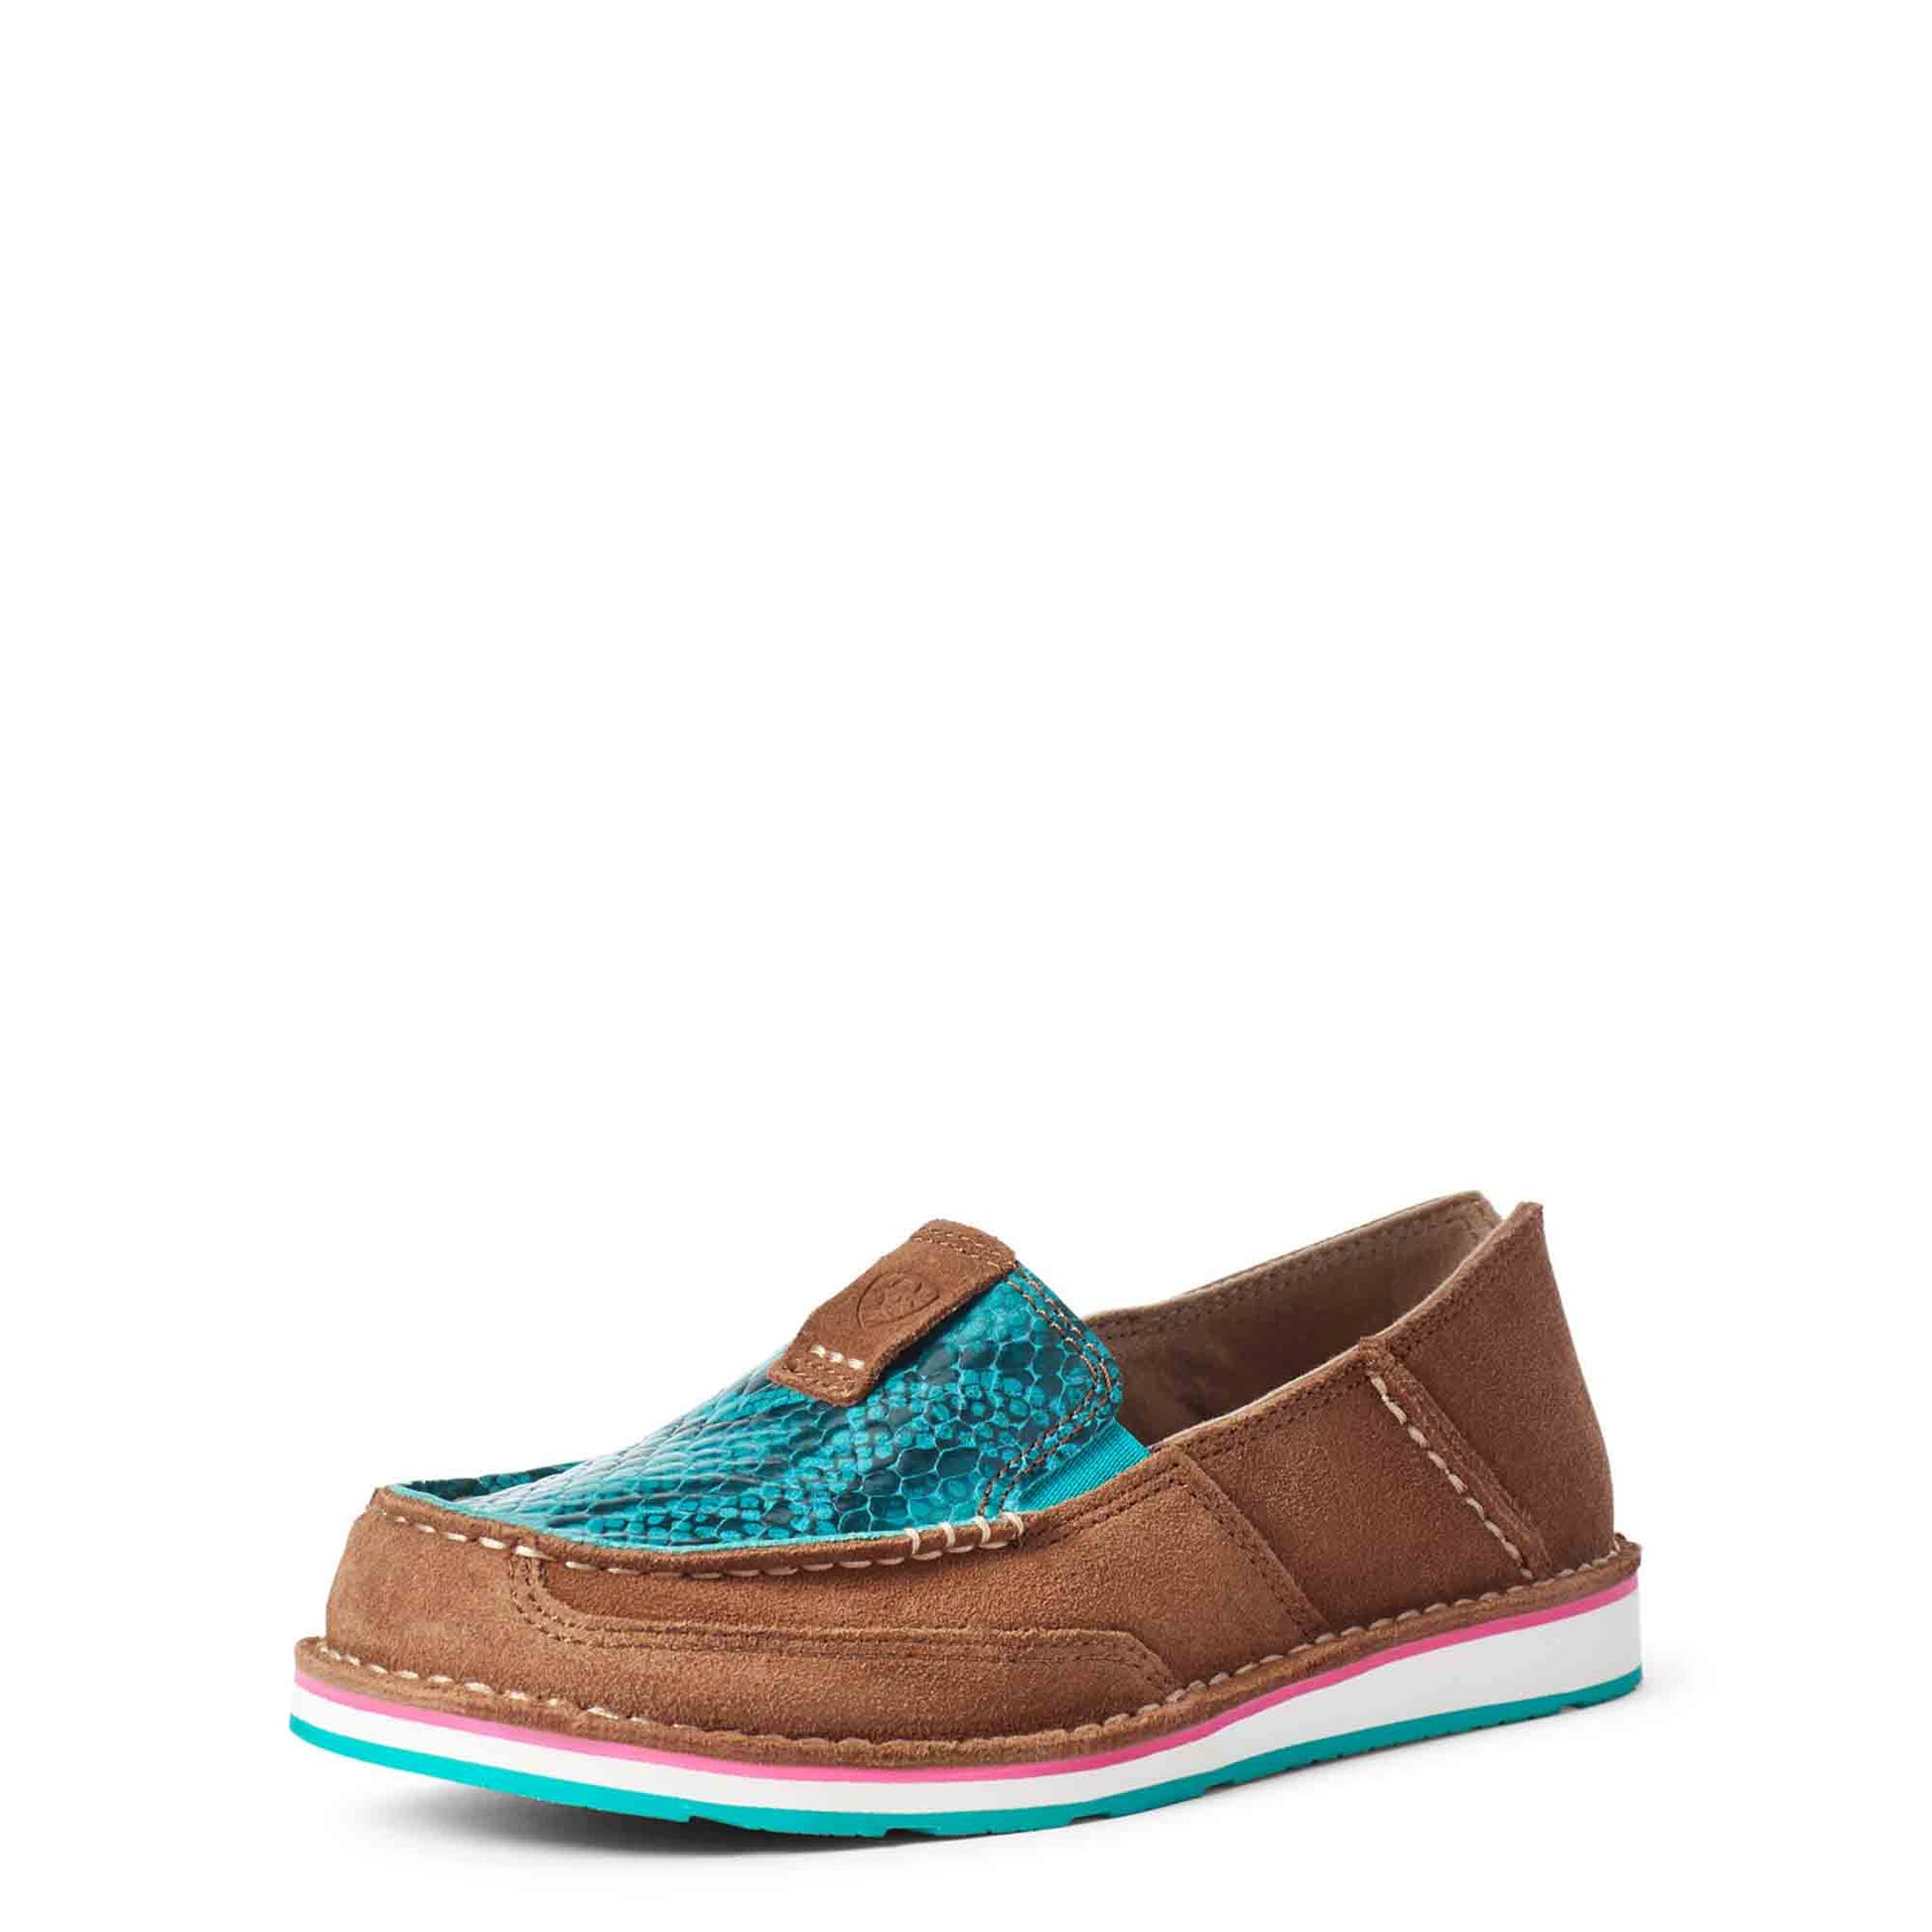 Ariat Women's Cruiser New Earth Suede-Turquoise